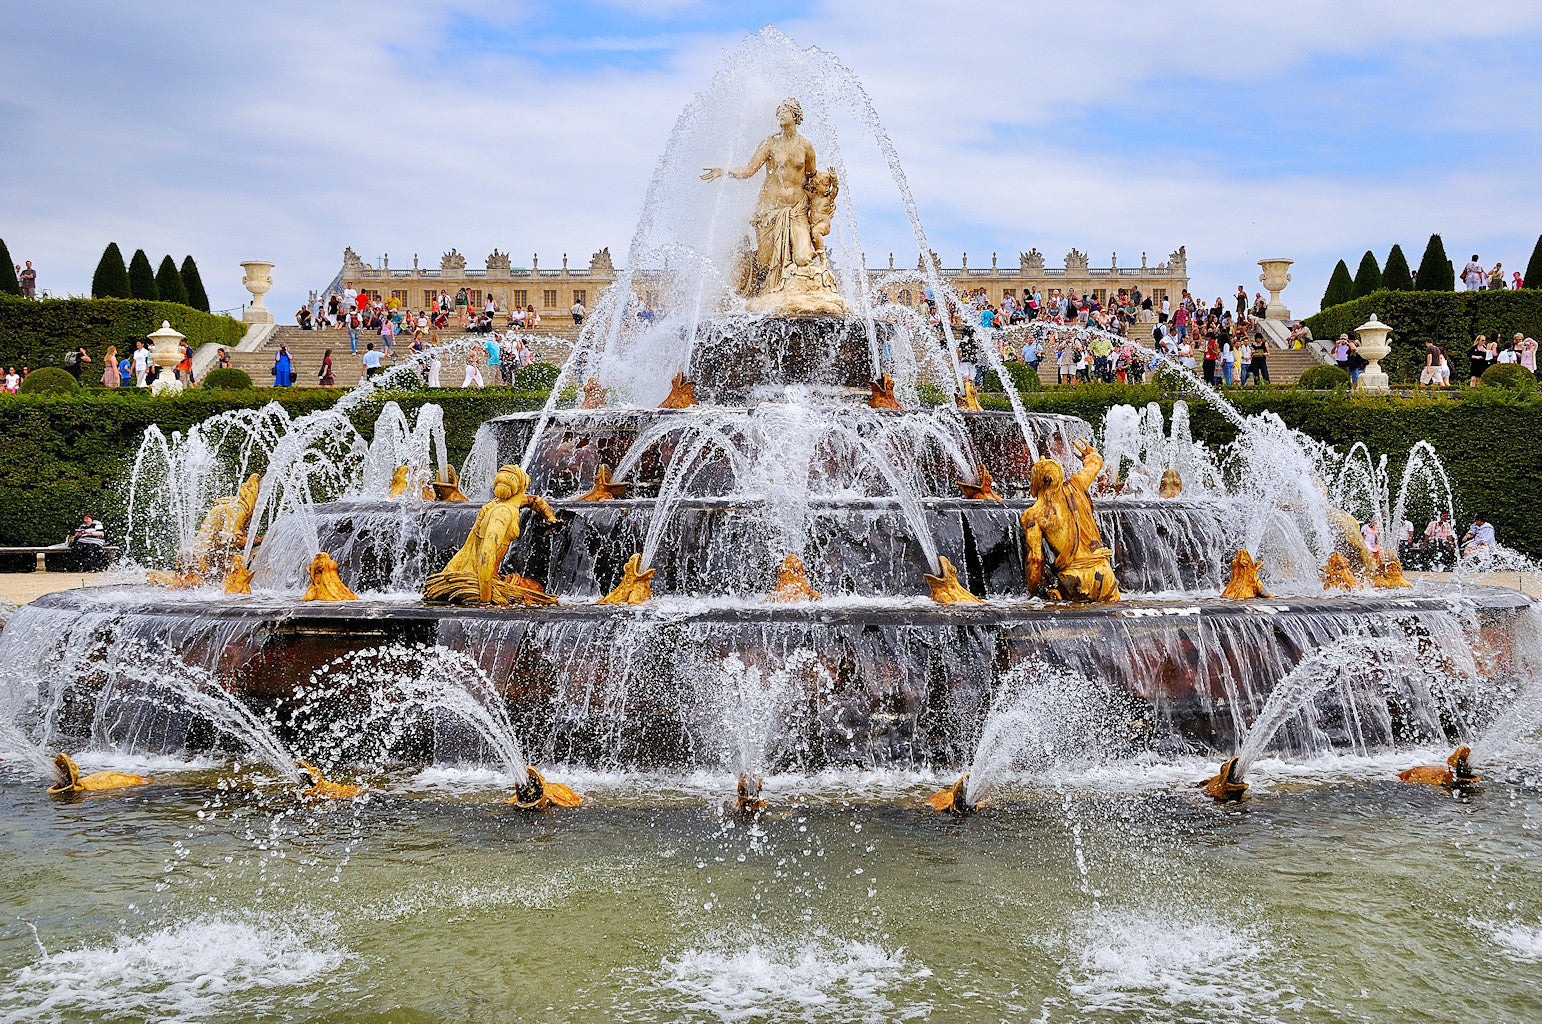 Outdoor Fountains of the Gardens of Versailles